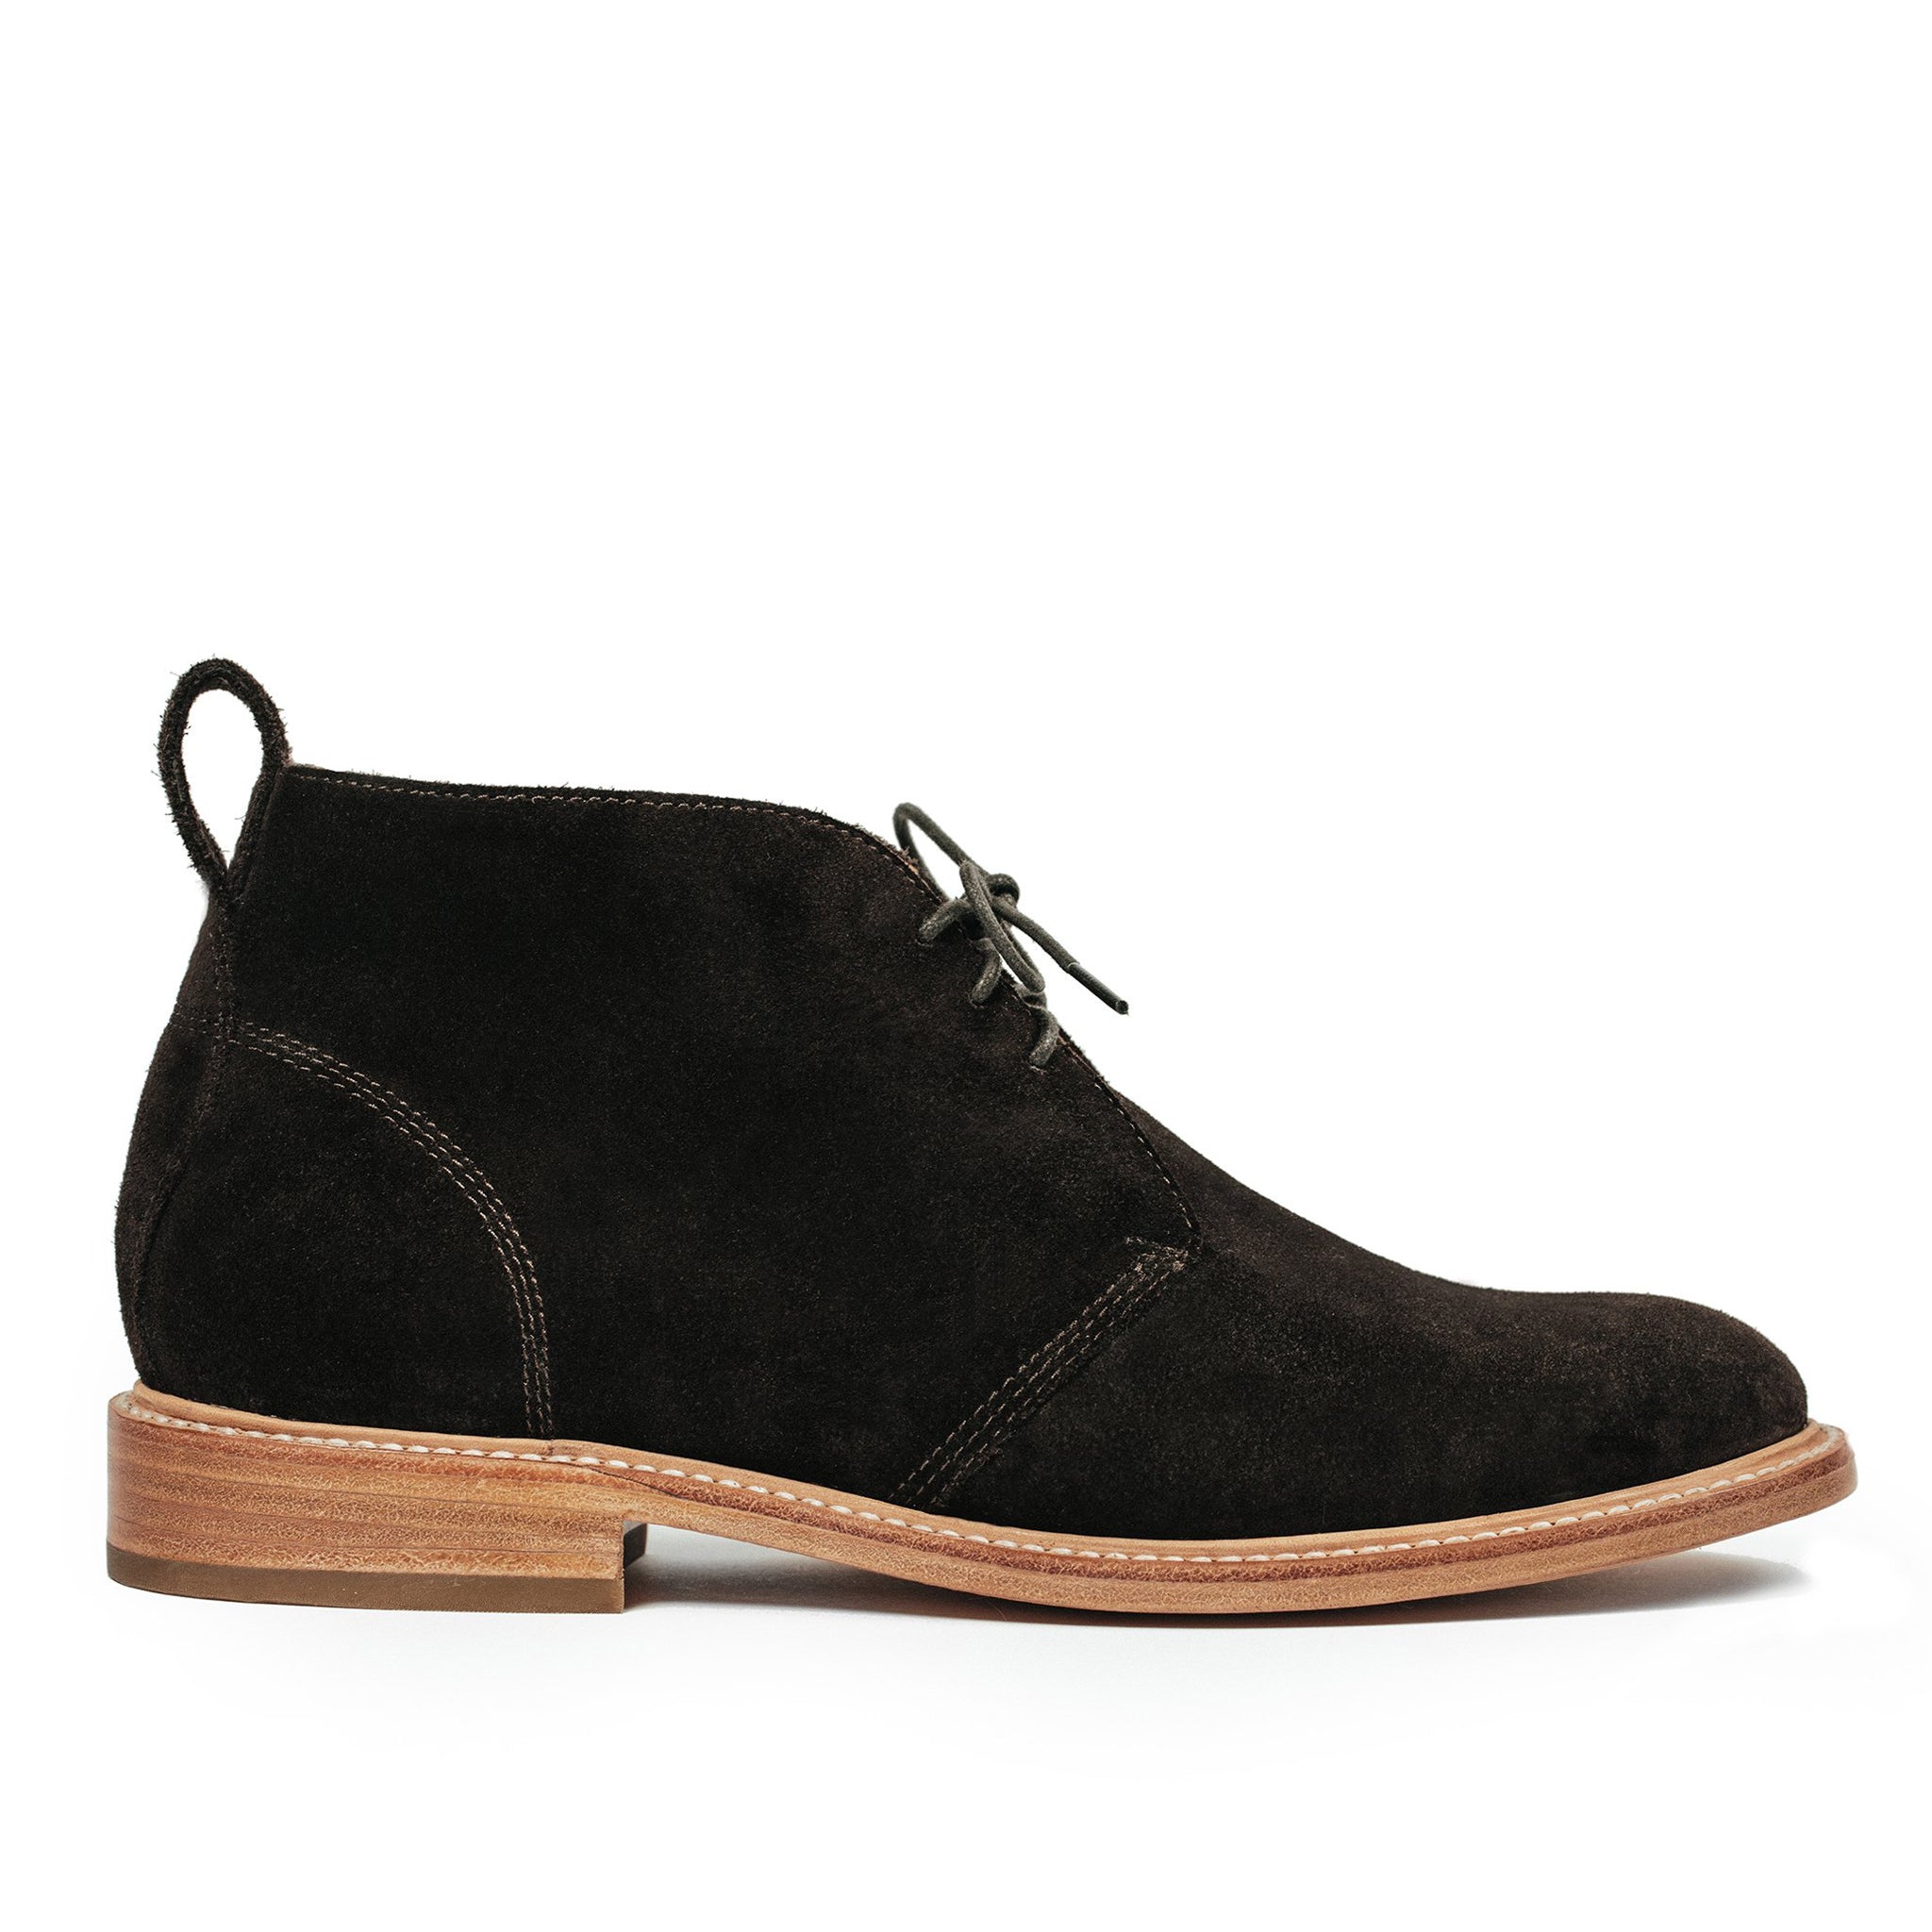 suede chukka shoes